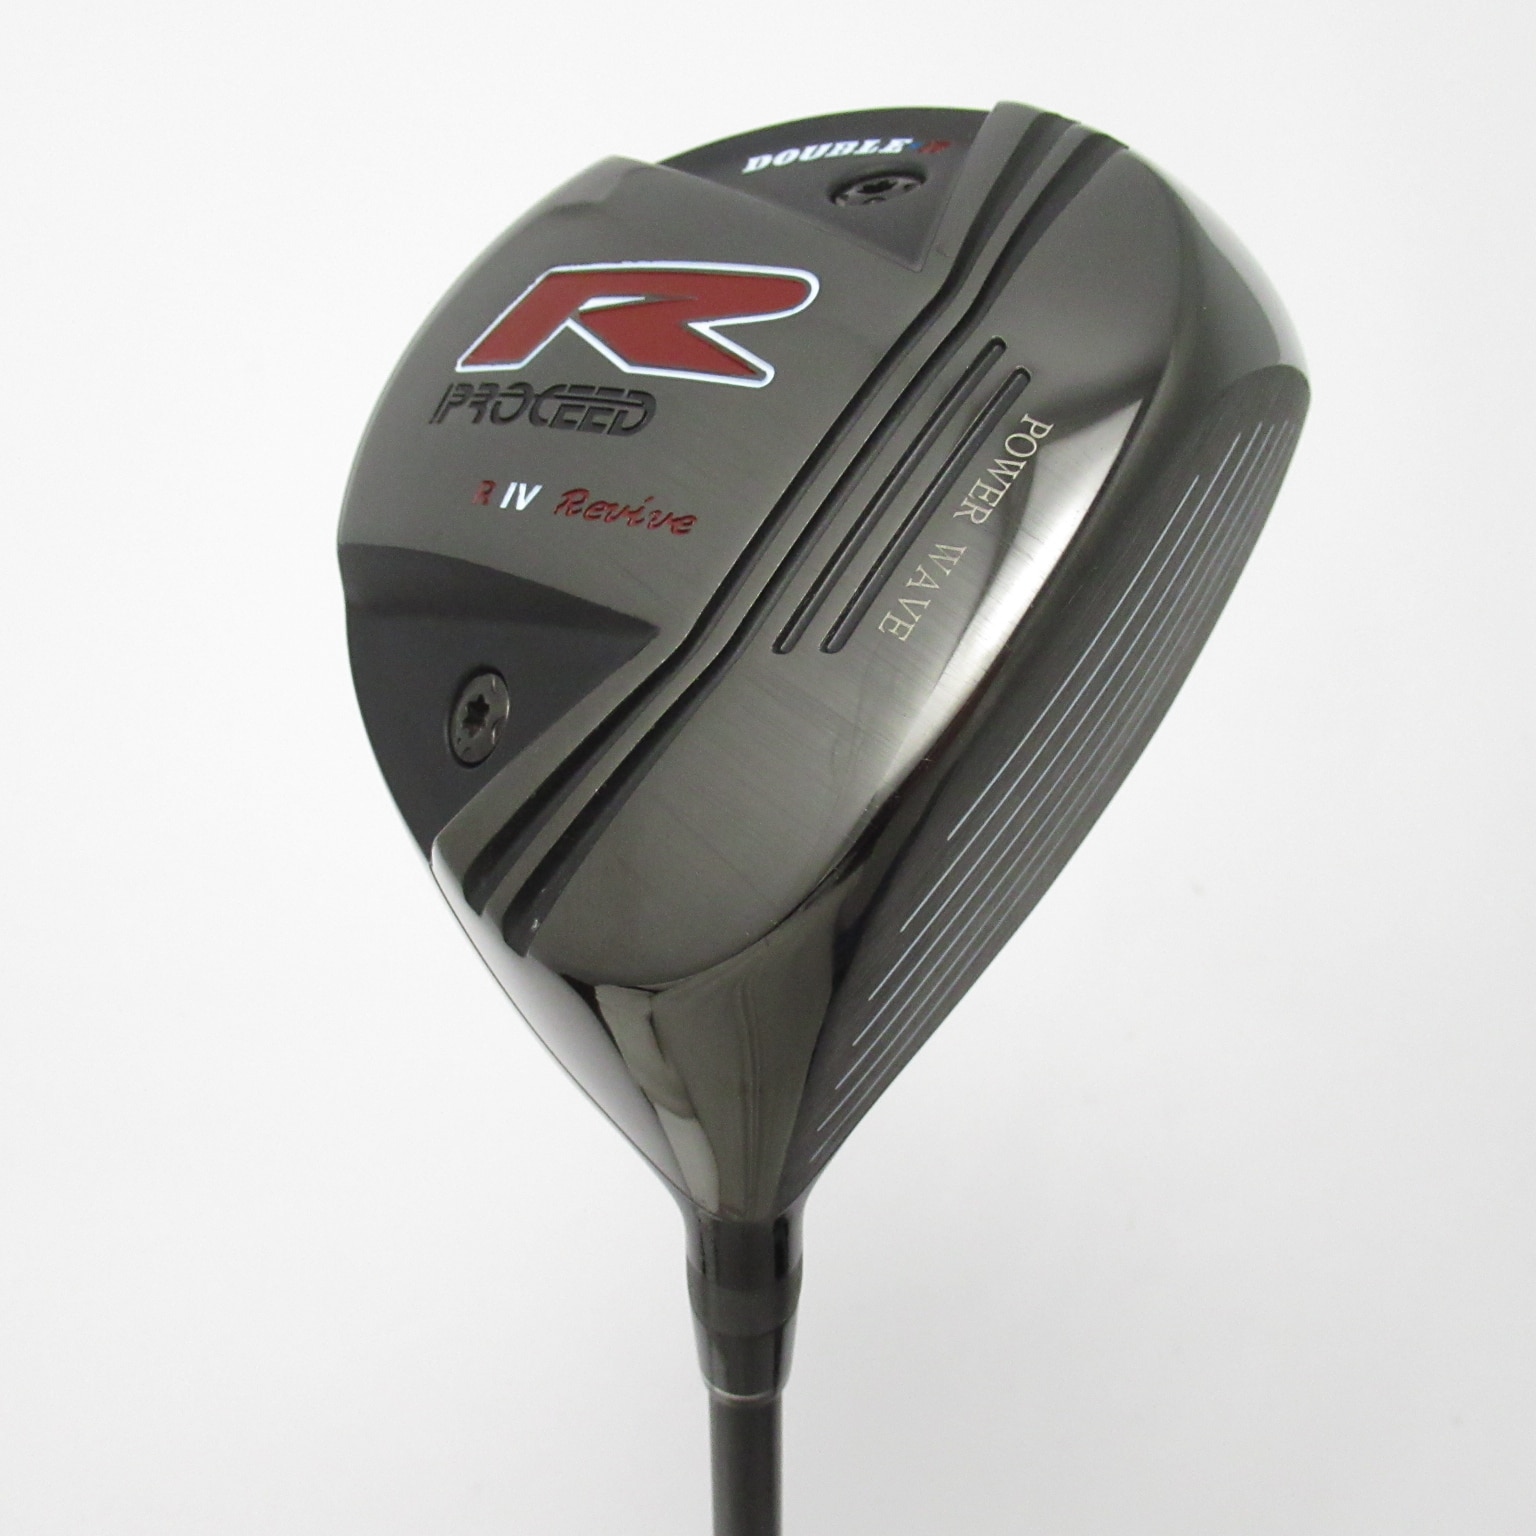 PROCEED DOUBLE-R 4 REVIVE 中古ドライバー ジャスティック その他 ...